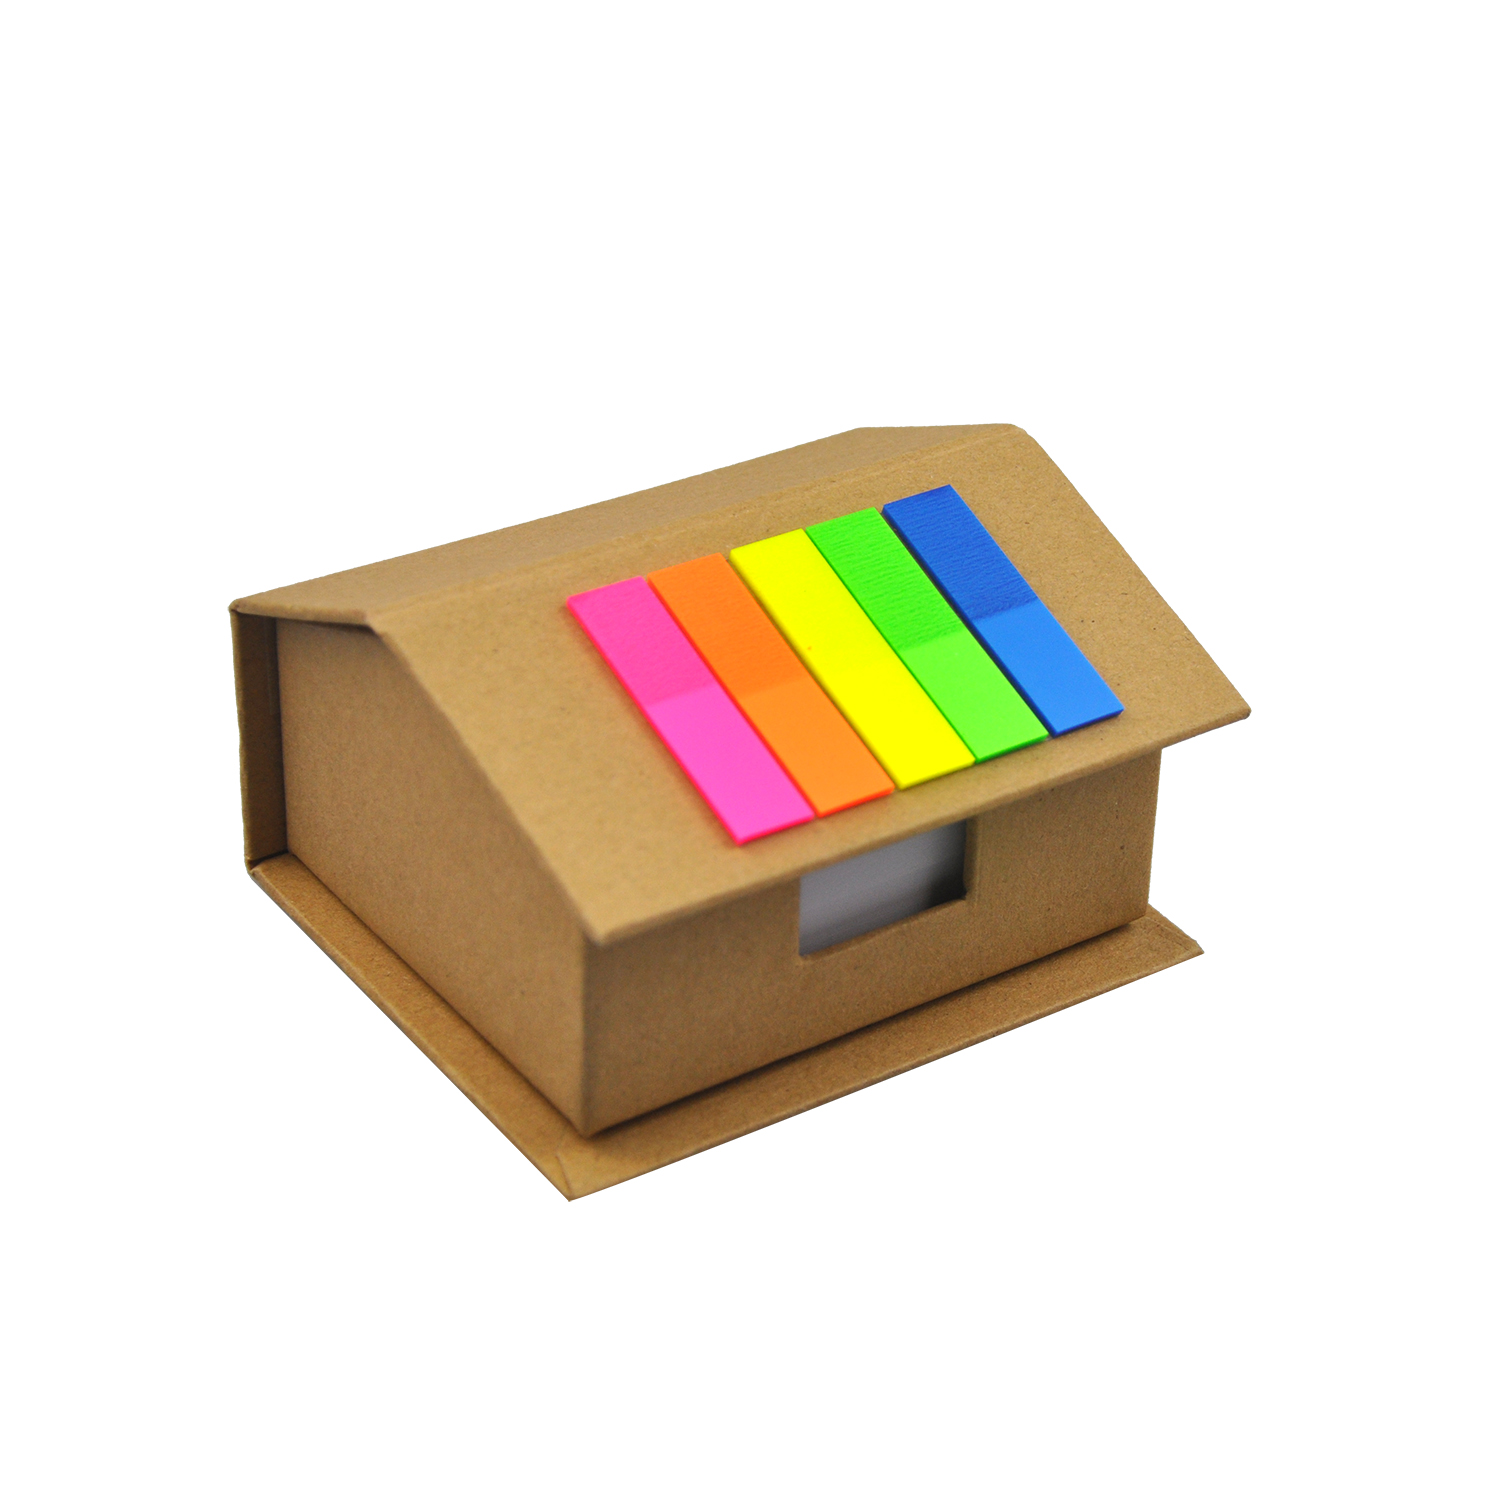 Promotional Creative House-shape Box Notepad with White Paper and Colorful Notes Label